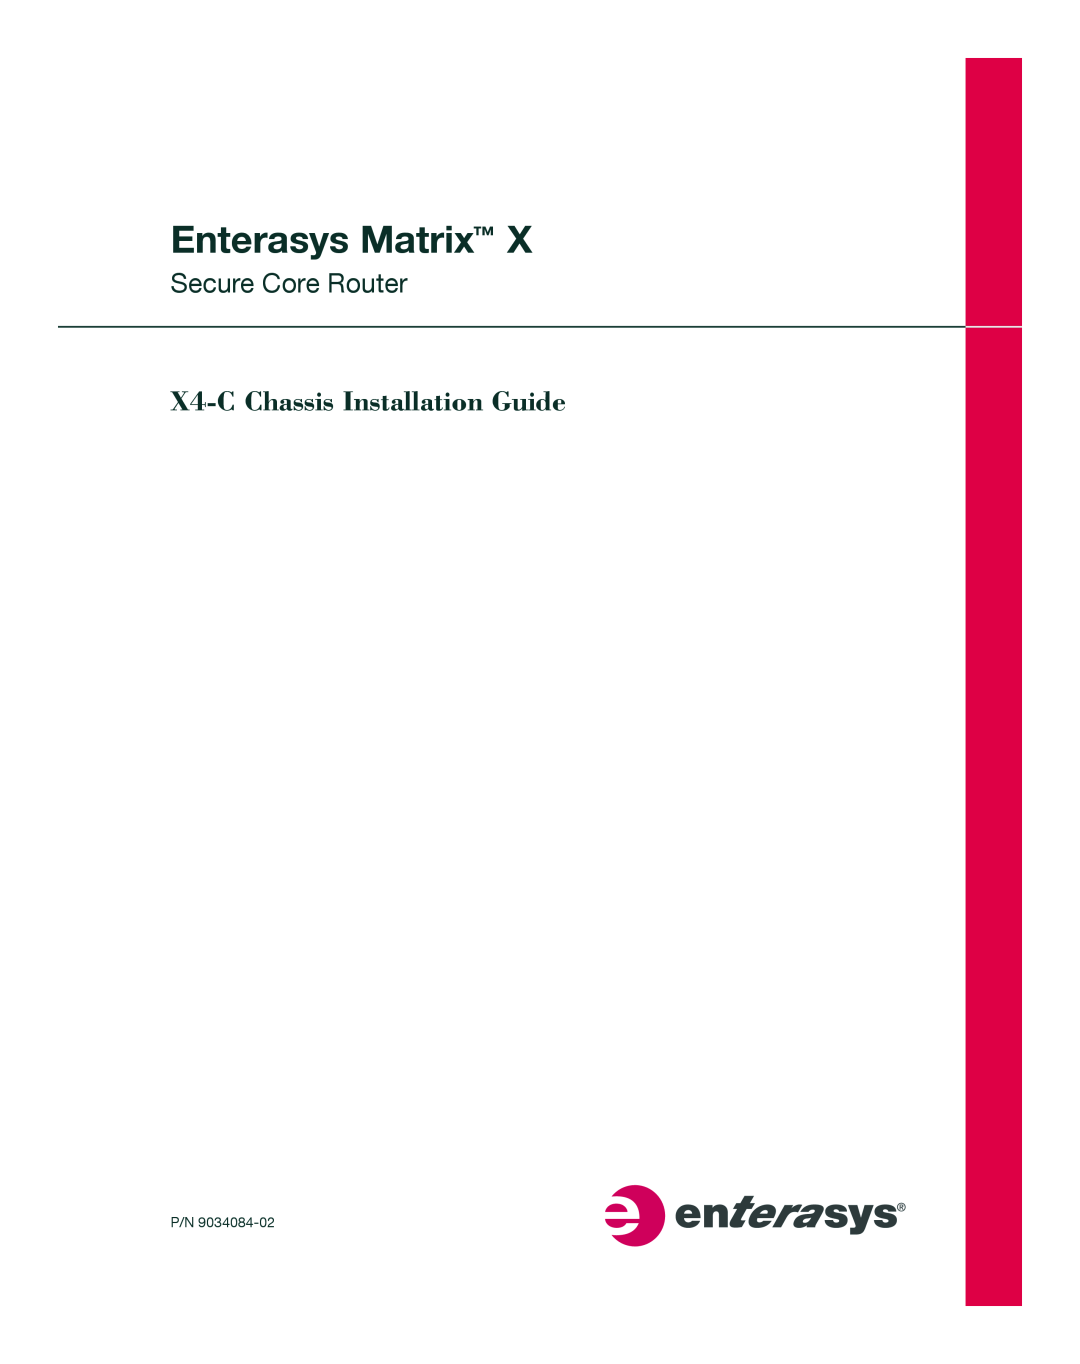 Enterasys Networks X009-U manual Enterasys Matrix, X4-C Chassis Installation Guide, Secure Core Router 